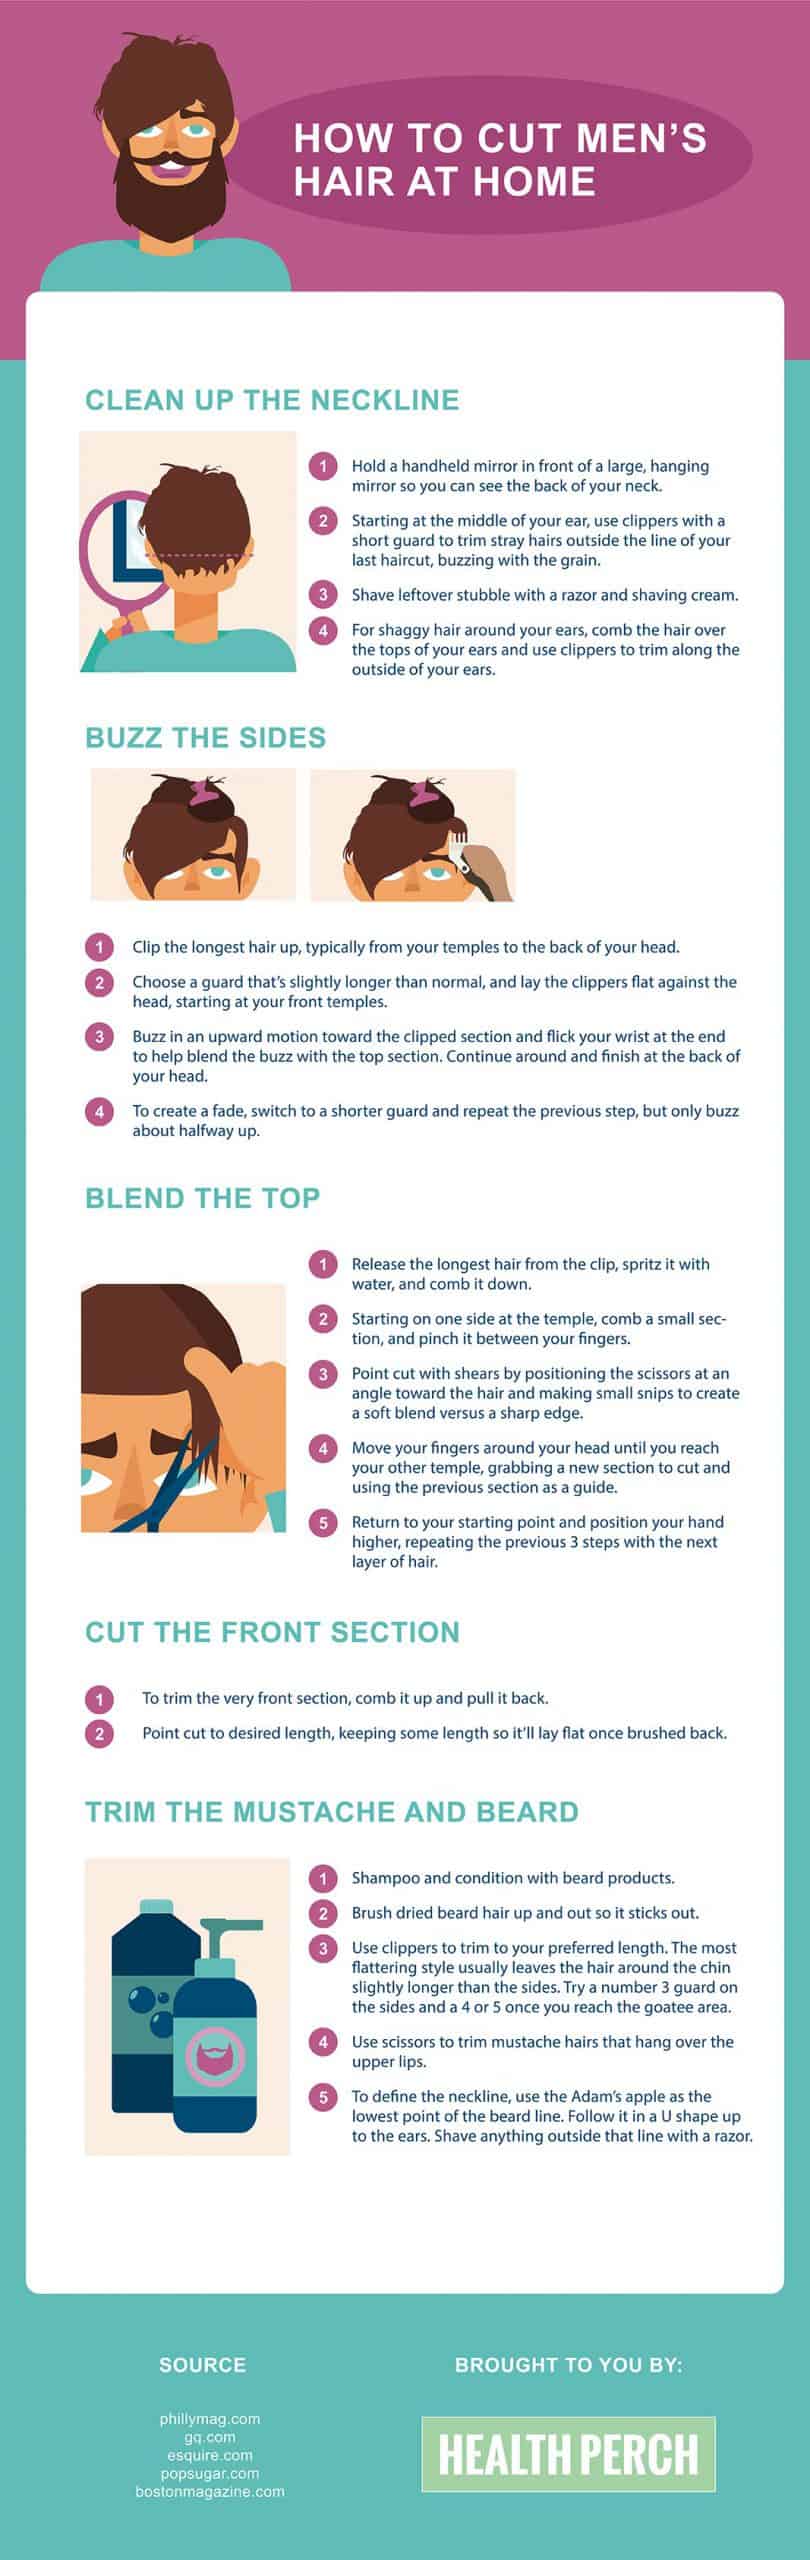 How to Cut Men’s Hair at Home Like a Pro